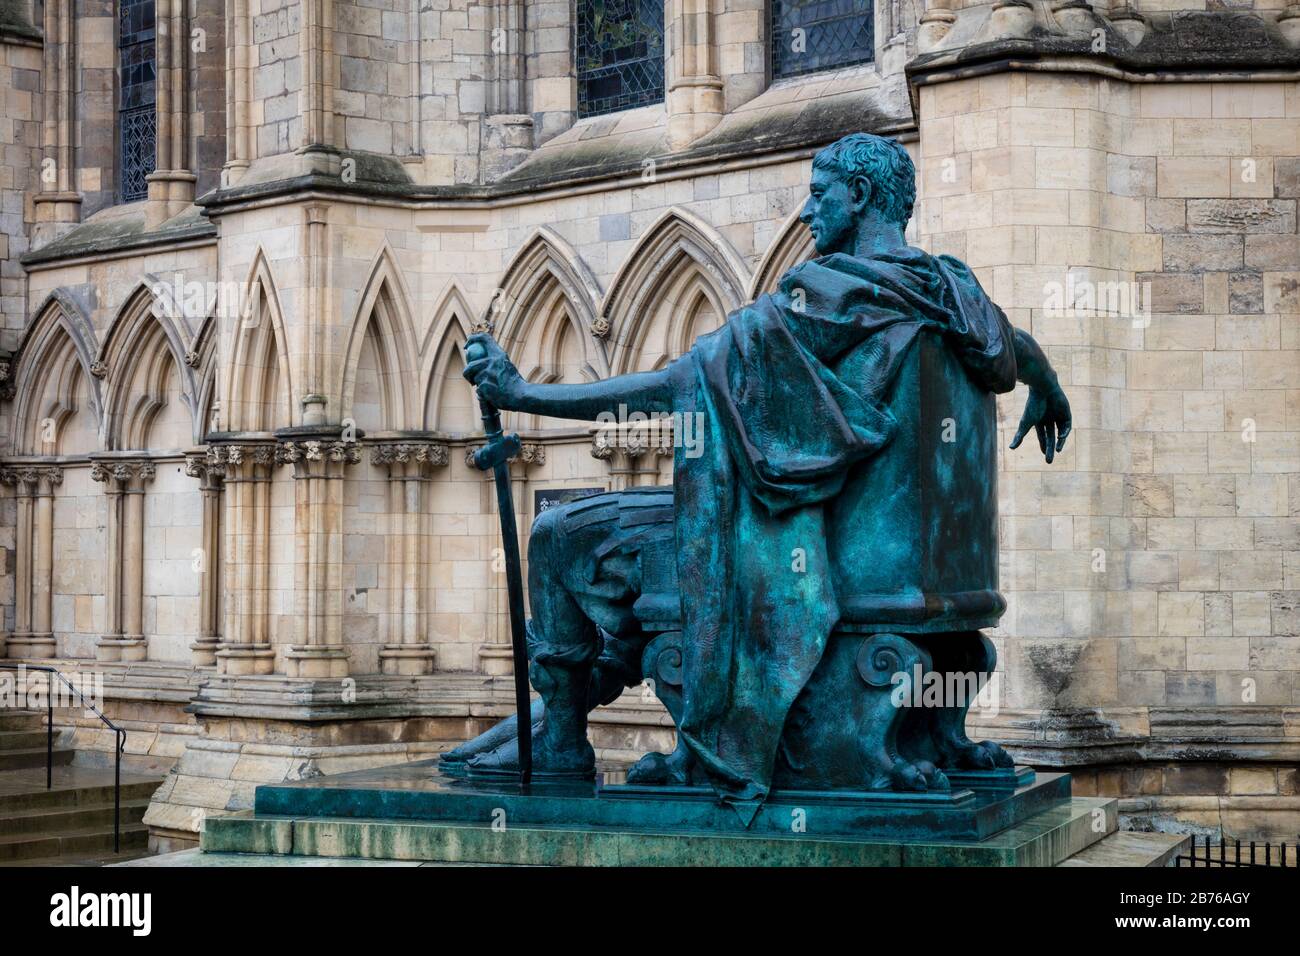 Bronze statue of Emperor Constantine and gothic architecture of York Minster, York, Yorkshire, England, UK Stock Photo